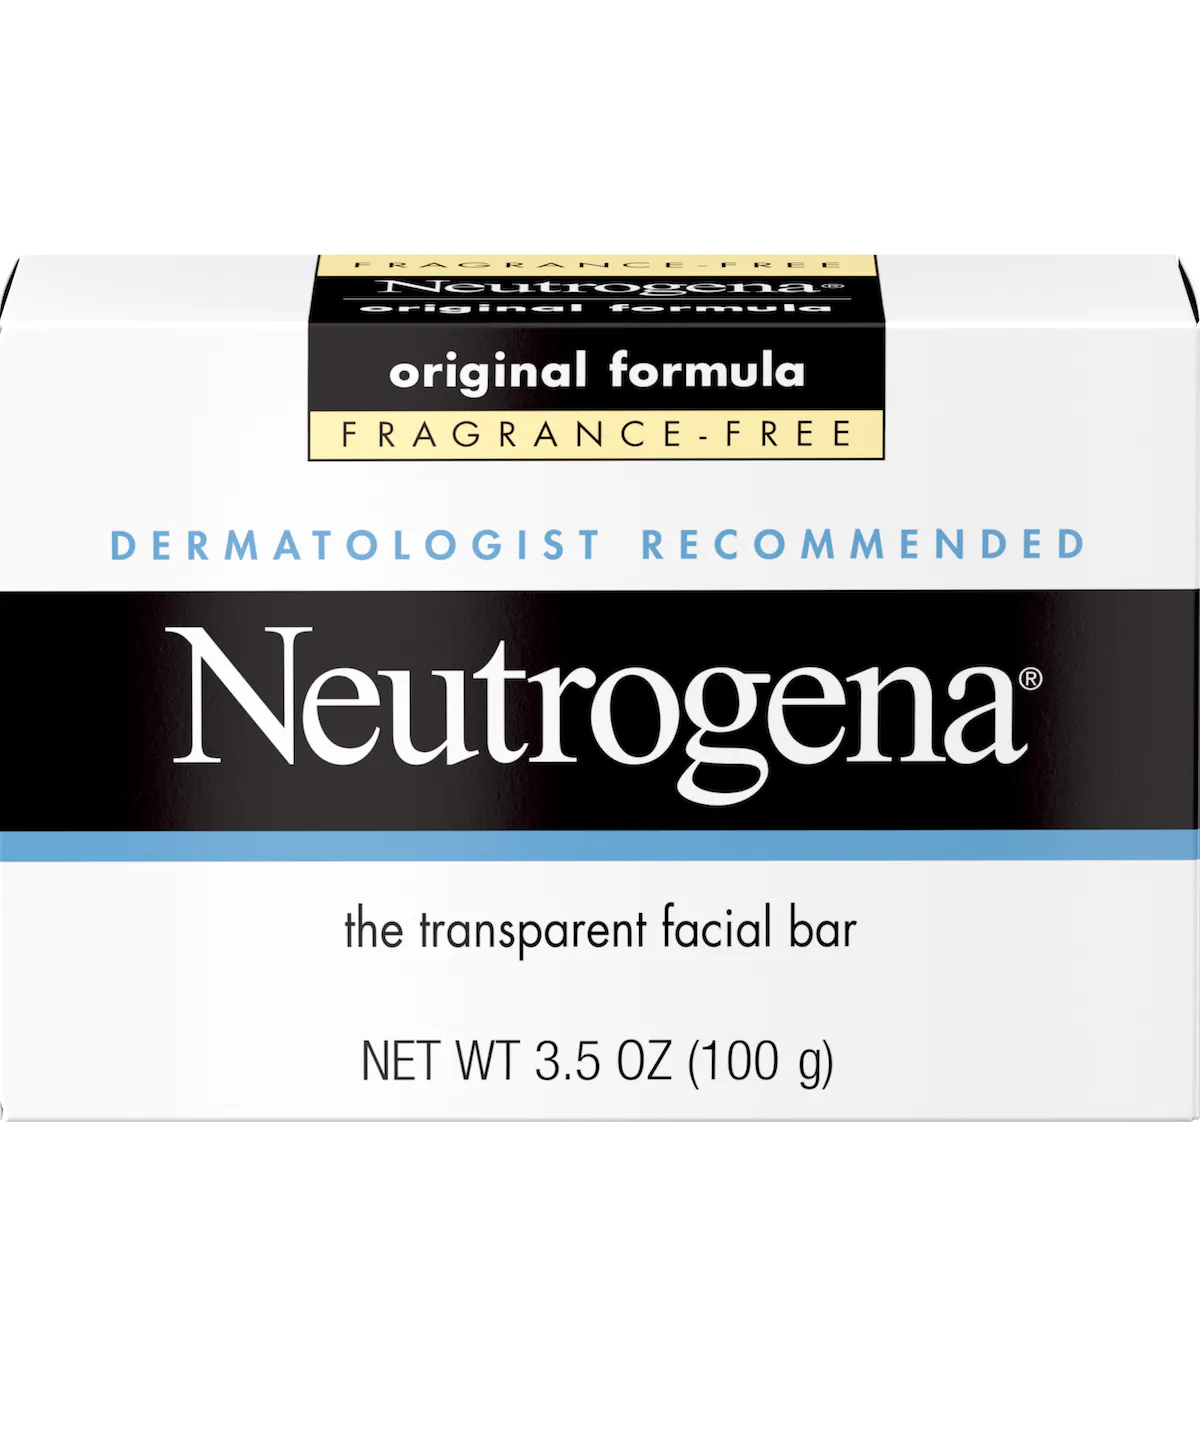 Neutrogena Original Amber Bar Fragrance-Free Facial Cleansing Bar with Glycerin, Pure & Transparent Gentle Face Wash Bar Soap, Free of Harsh Detergents, & Dyes, Hypoallergenic, 3.5 Oz